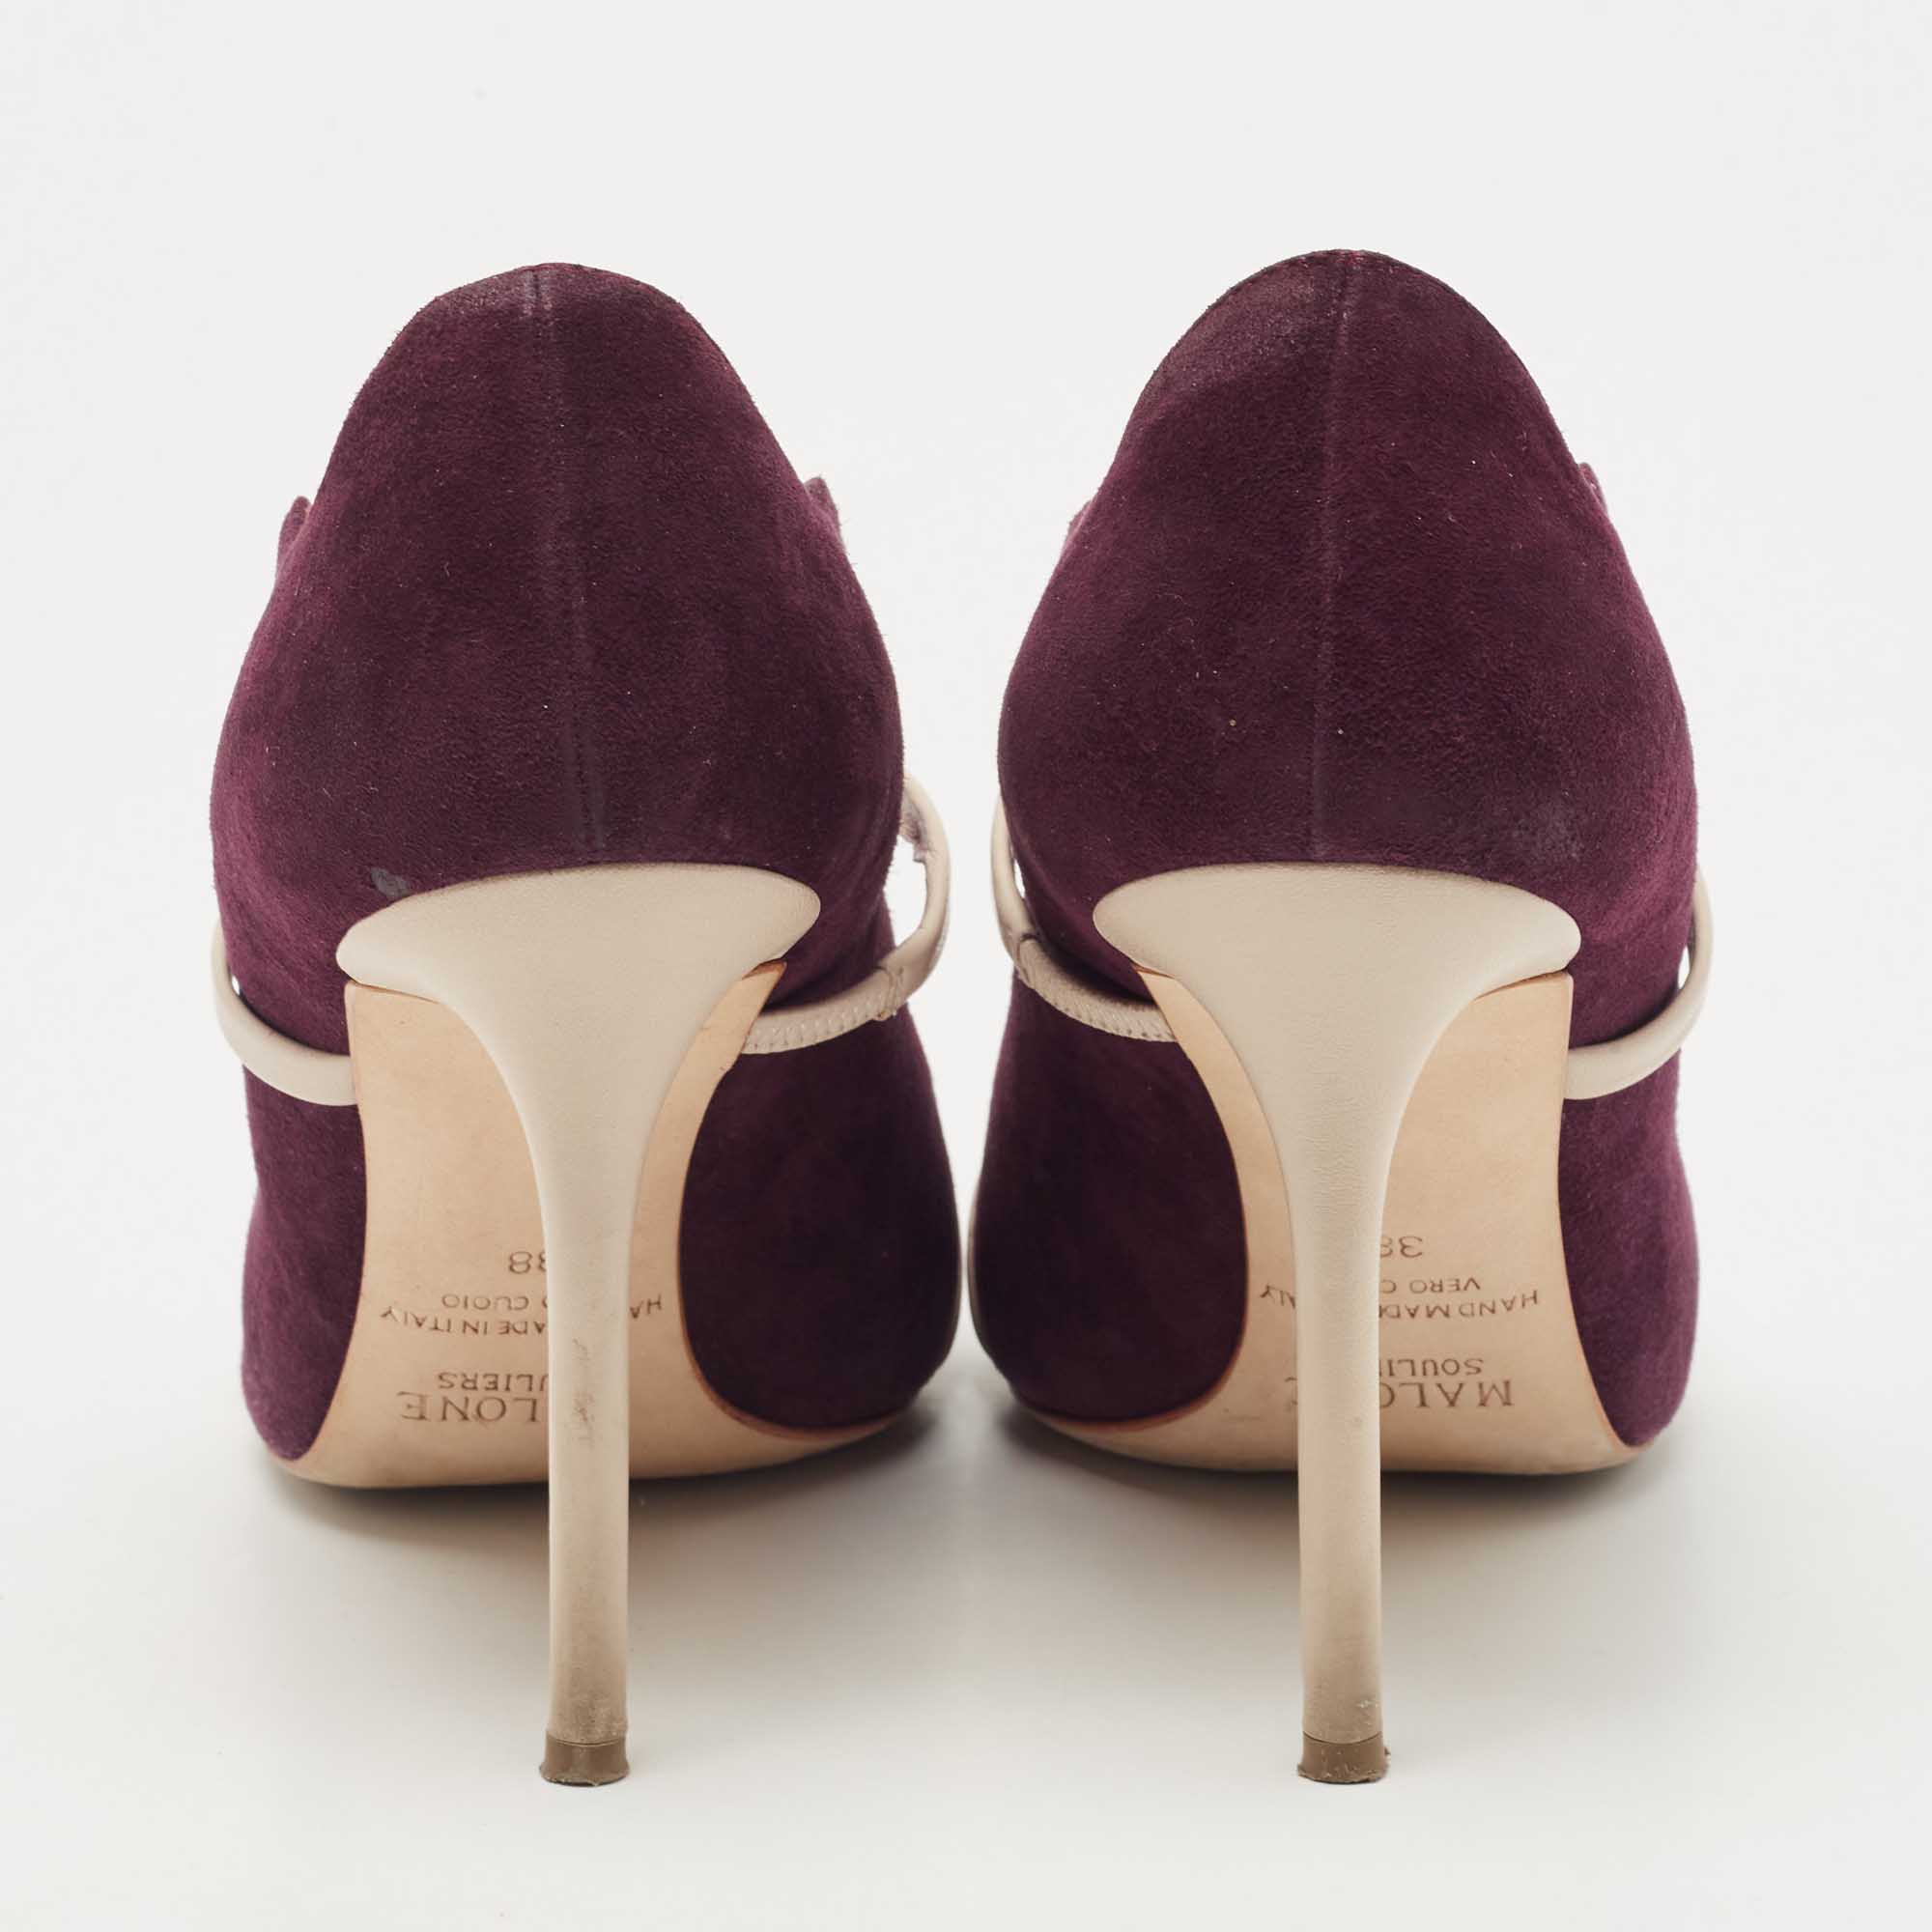 Malone Souliers Burgundy/Beige Suede And Leather Maureen Pumps Size 38